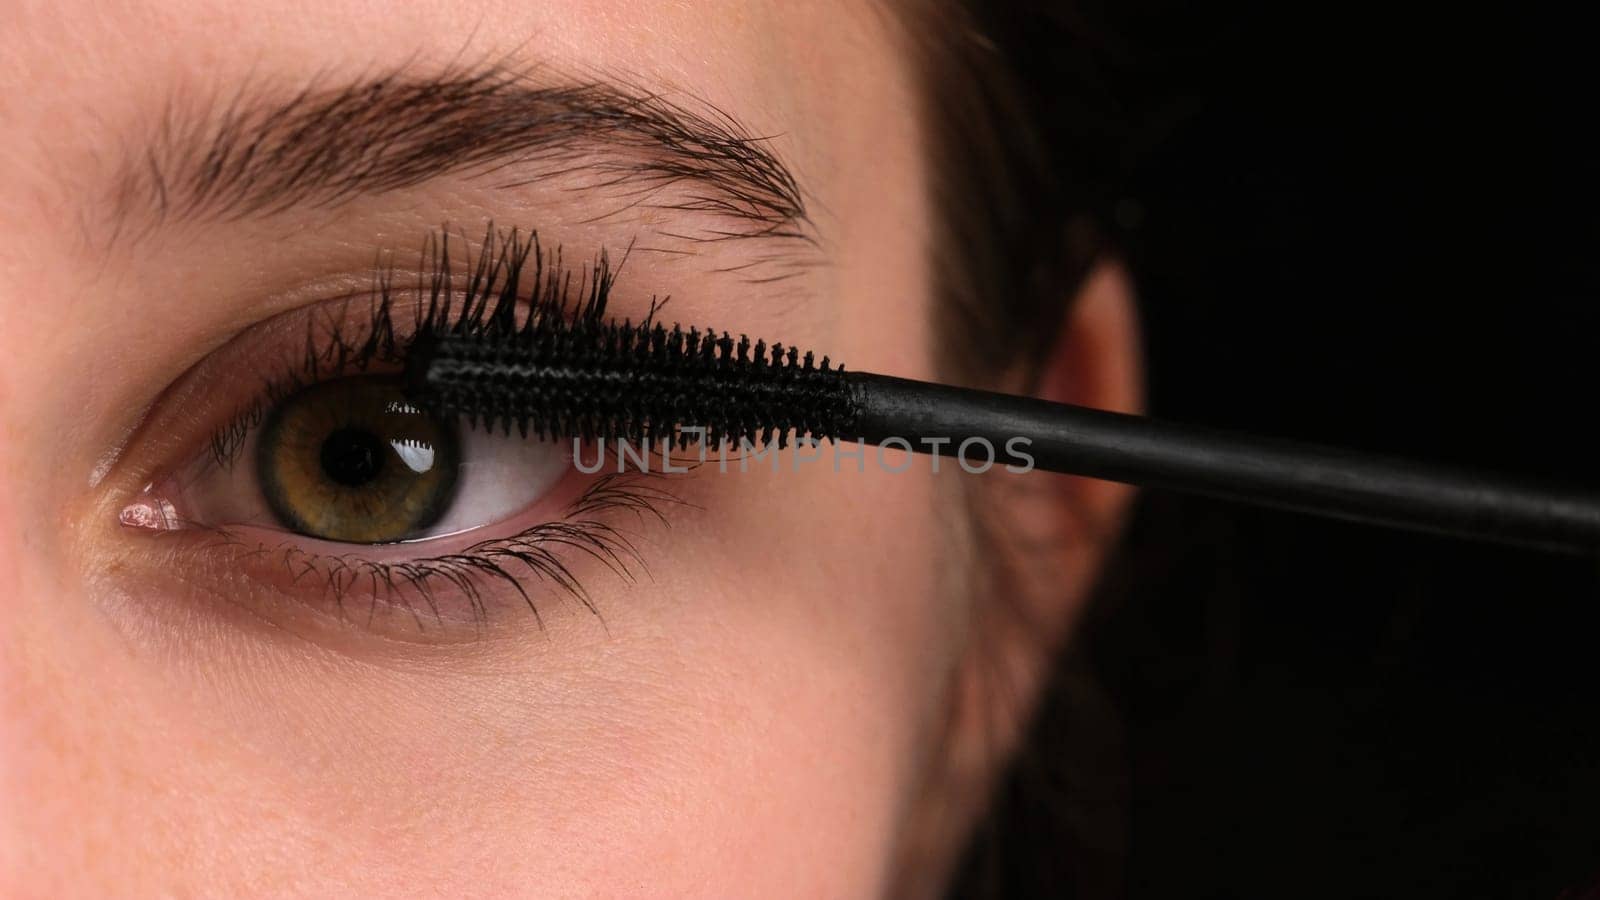 Young Girl Seen Applying Black Mascara To Her Eyelashes In A Close-Up Shot During A Professional Makeup Master Class